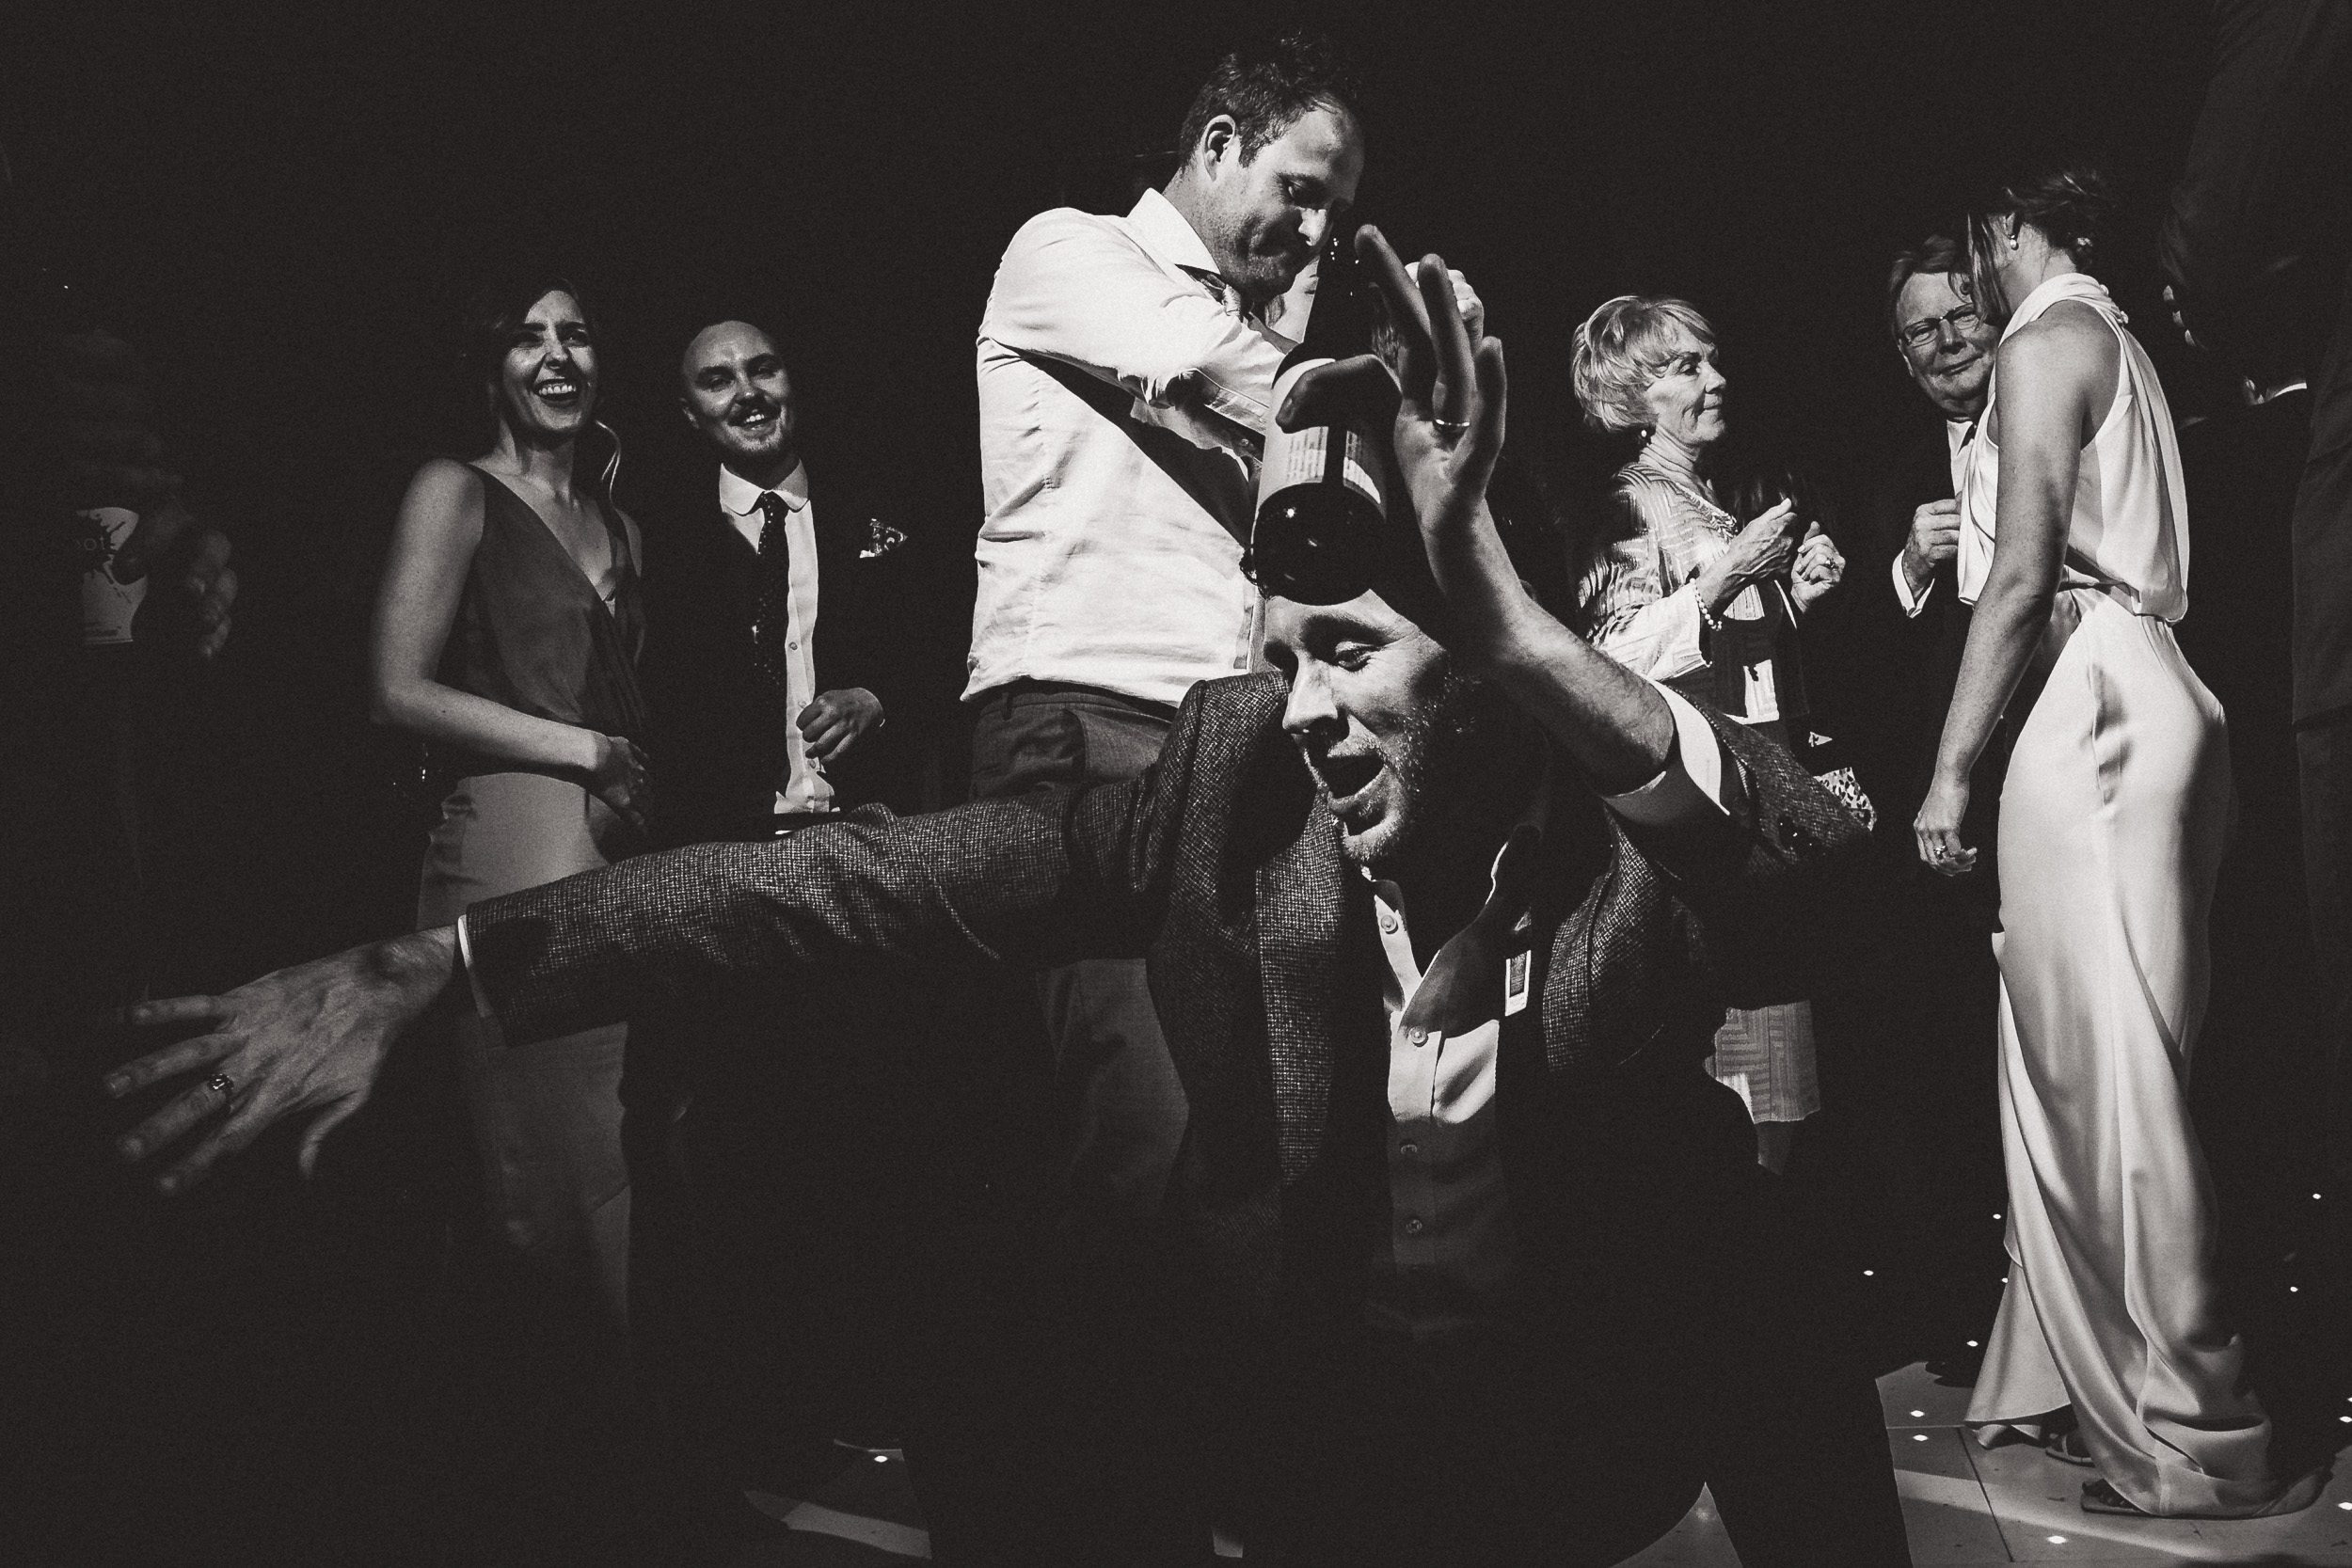 Black and white photo of a groom dancing with a group of people at a wedding.